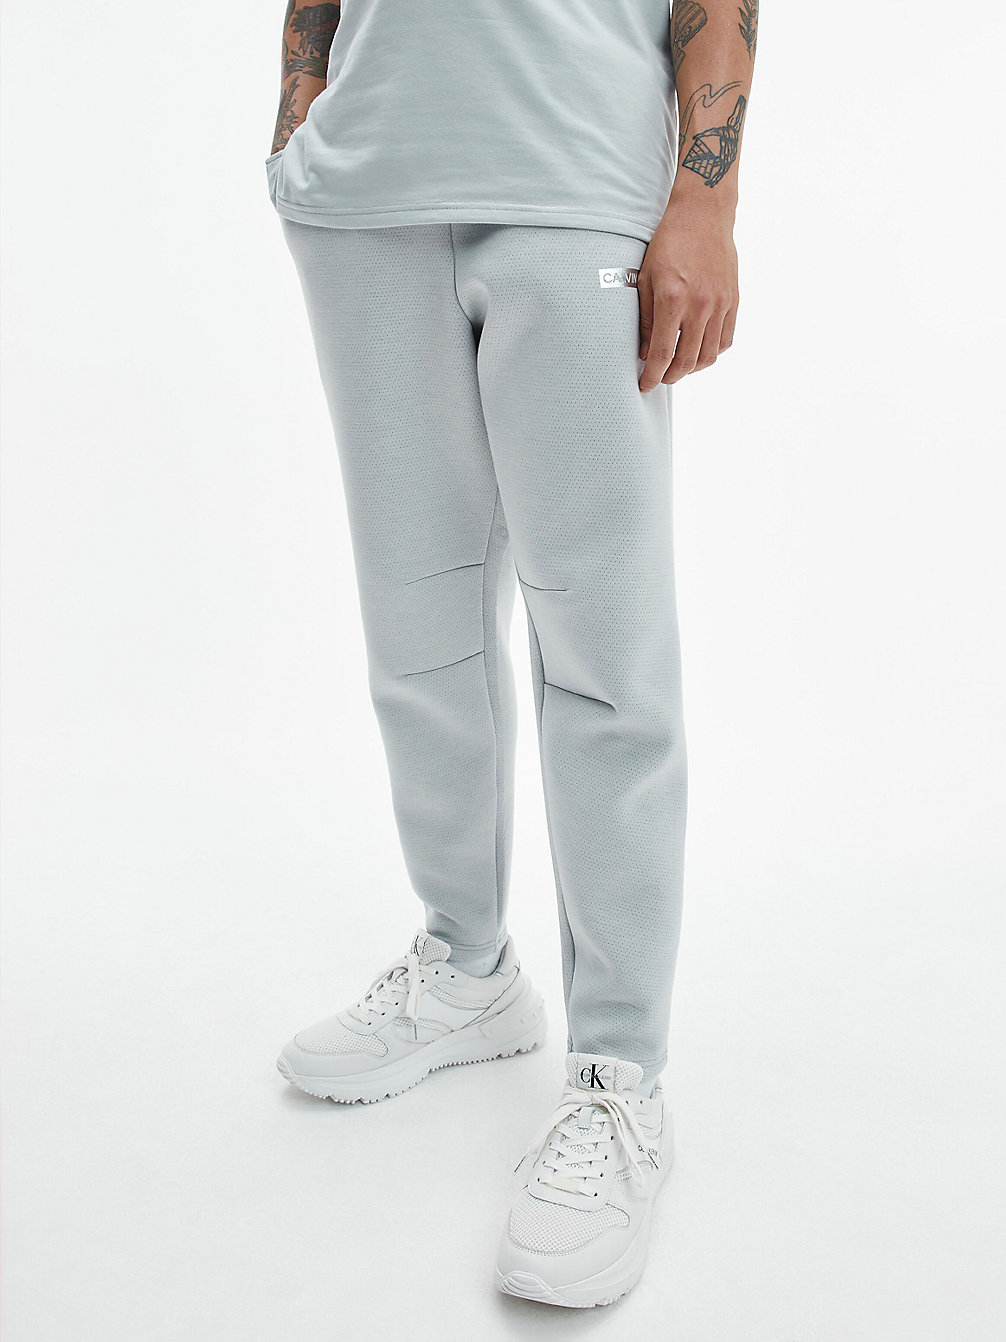 HIGH RISE / CYBER YELLOW Tapered Jogginghose undefined Herren Calvin Klein